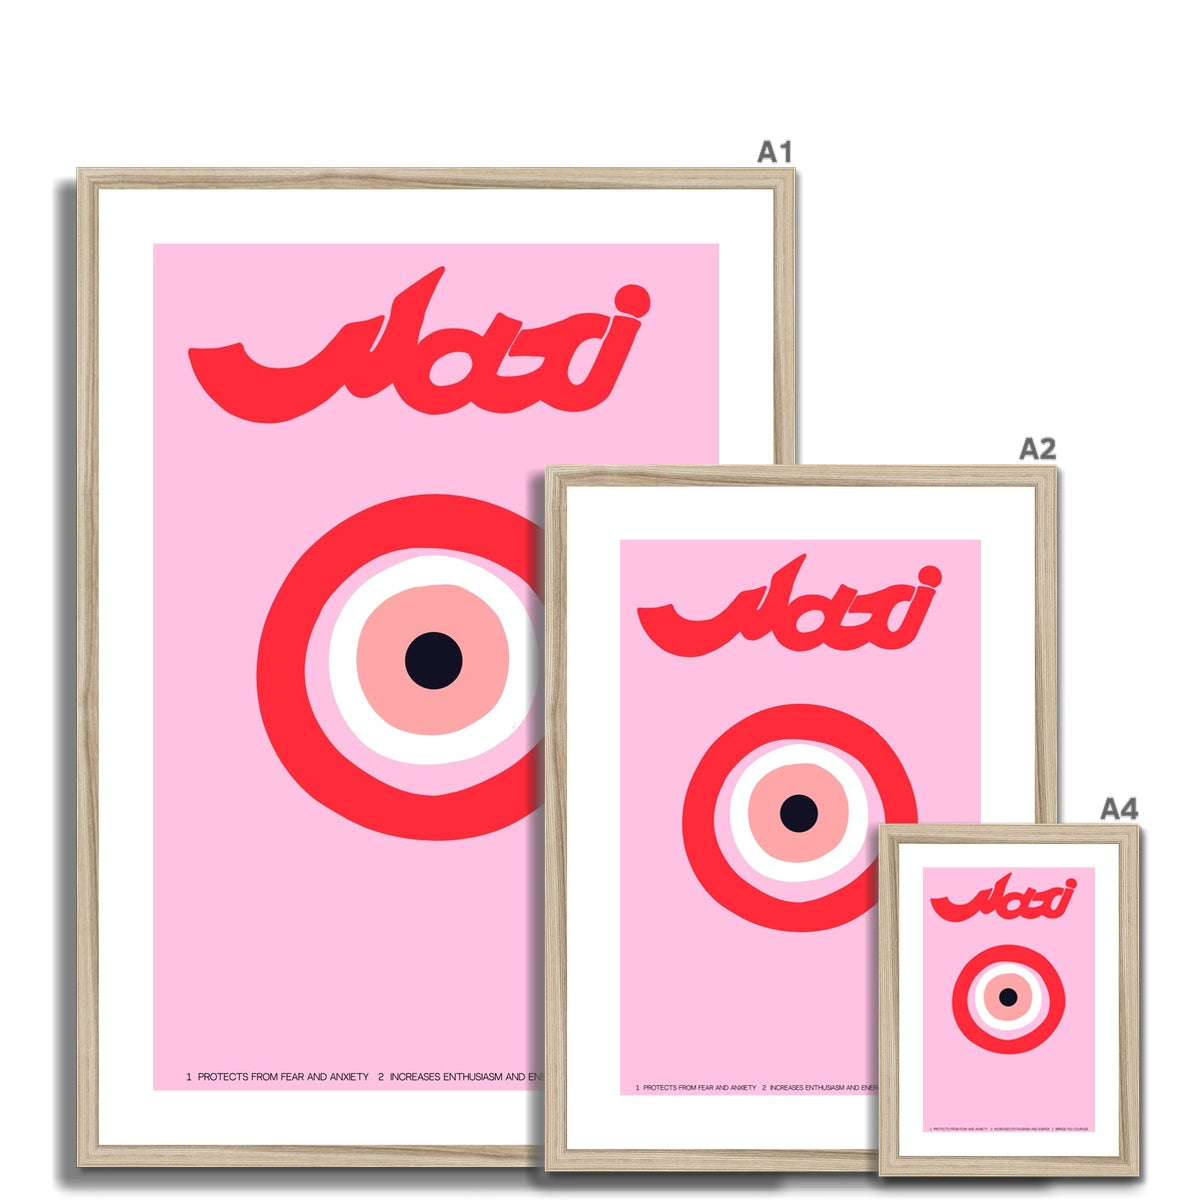 © les muses / Evil eye wall art prints inspired from the Greek islands of Santorini and Mykonos.
Colorful summer posters that make cute dorm and apartment decor.